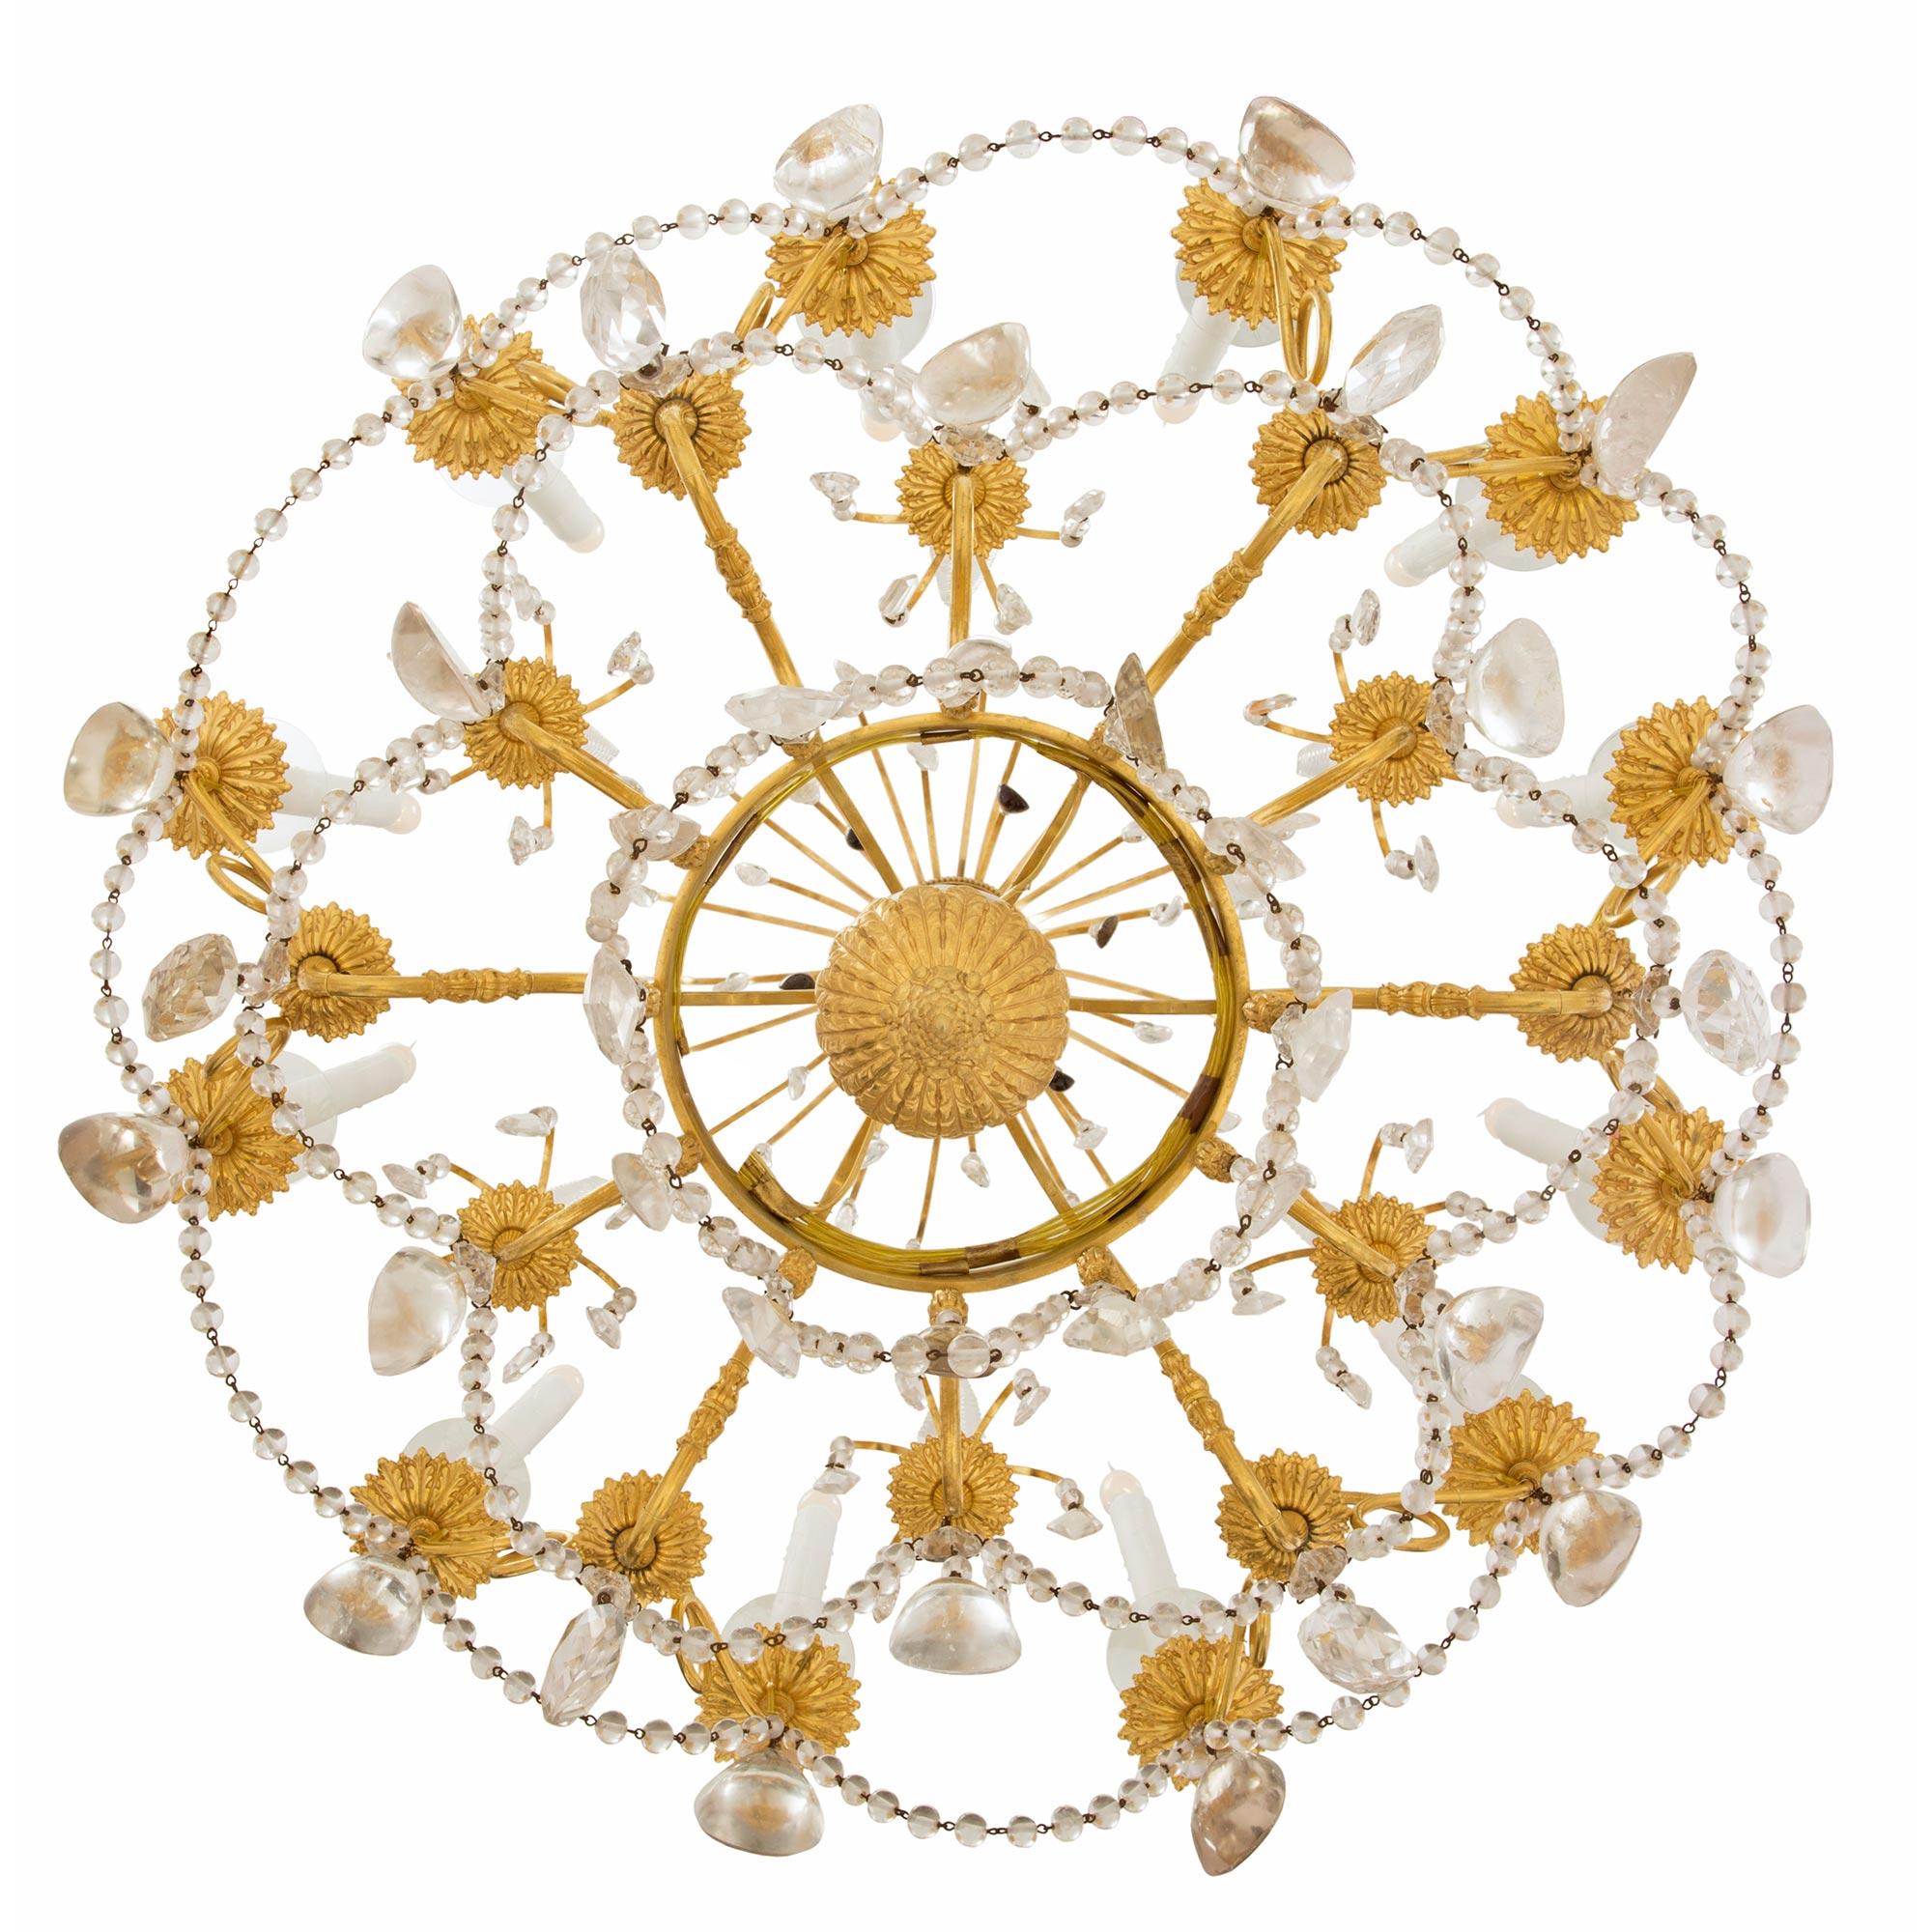 Russian Imperial 19th Century Neoclassical Style Rock Crystal Chandelier For Sale 4